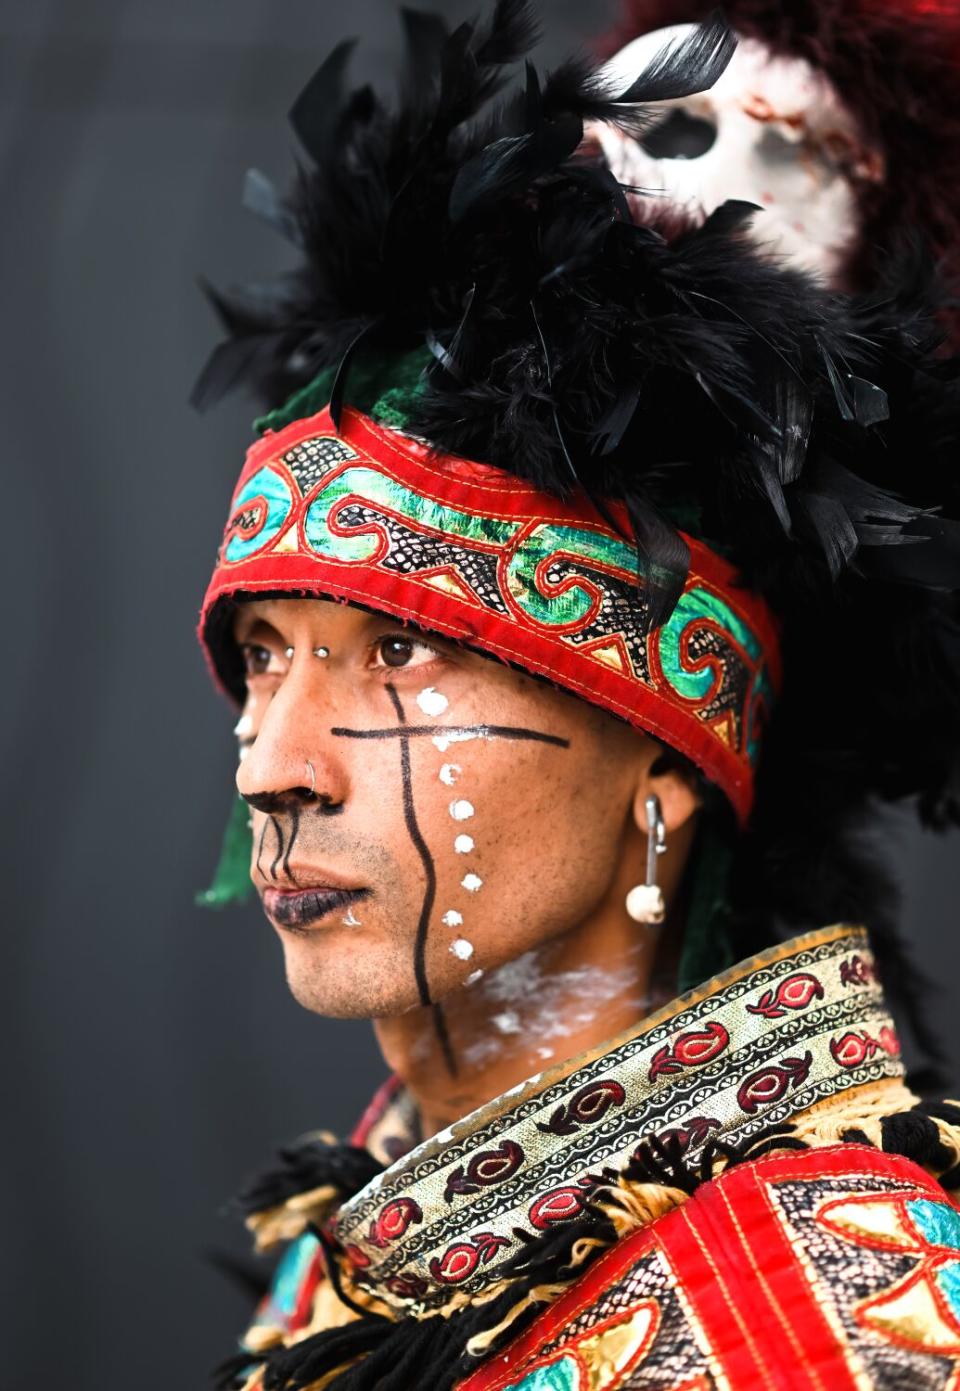 A man in a feathered headdress and face paint